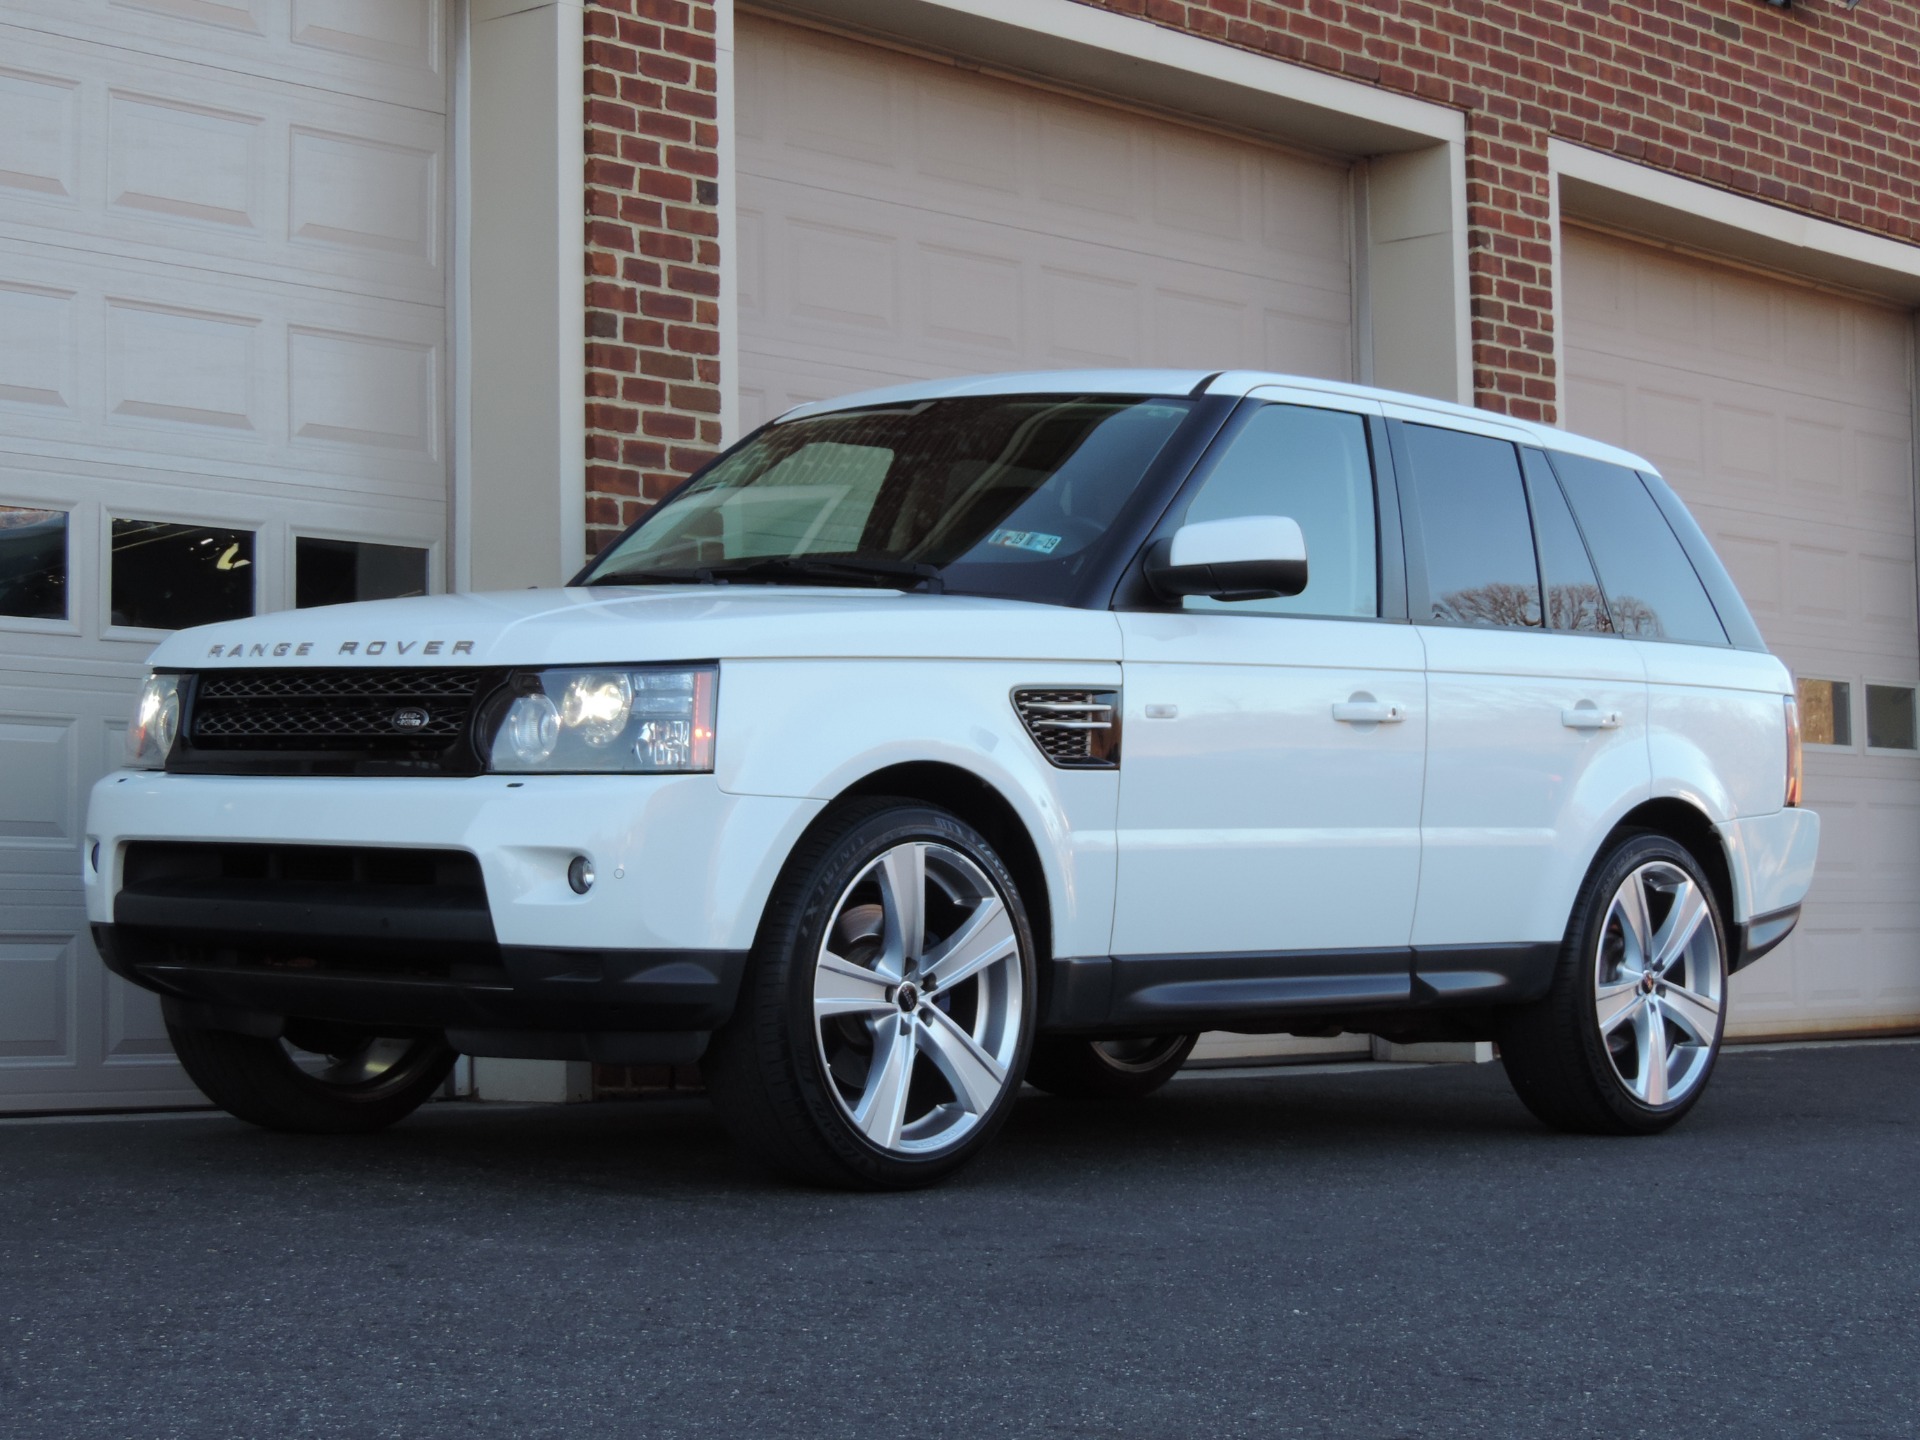 2012 Land Rover Range Rover Sport HSE Stock # 755954 for sale near